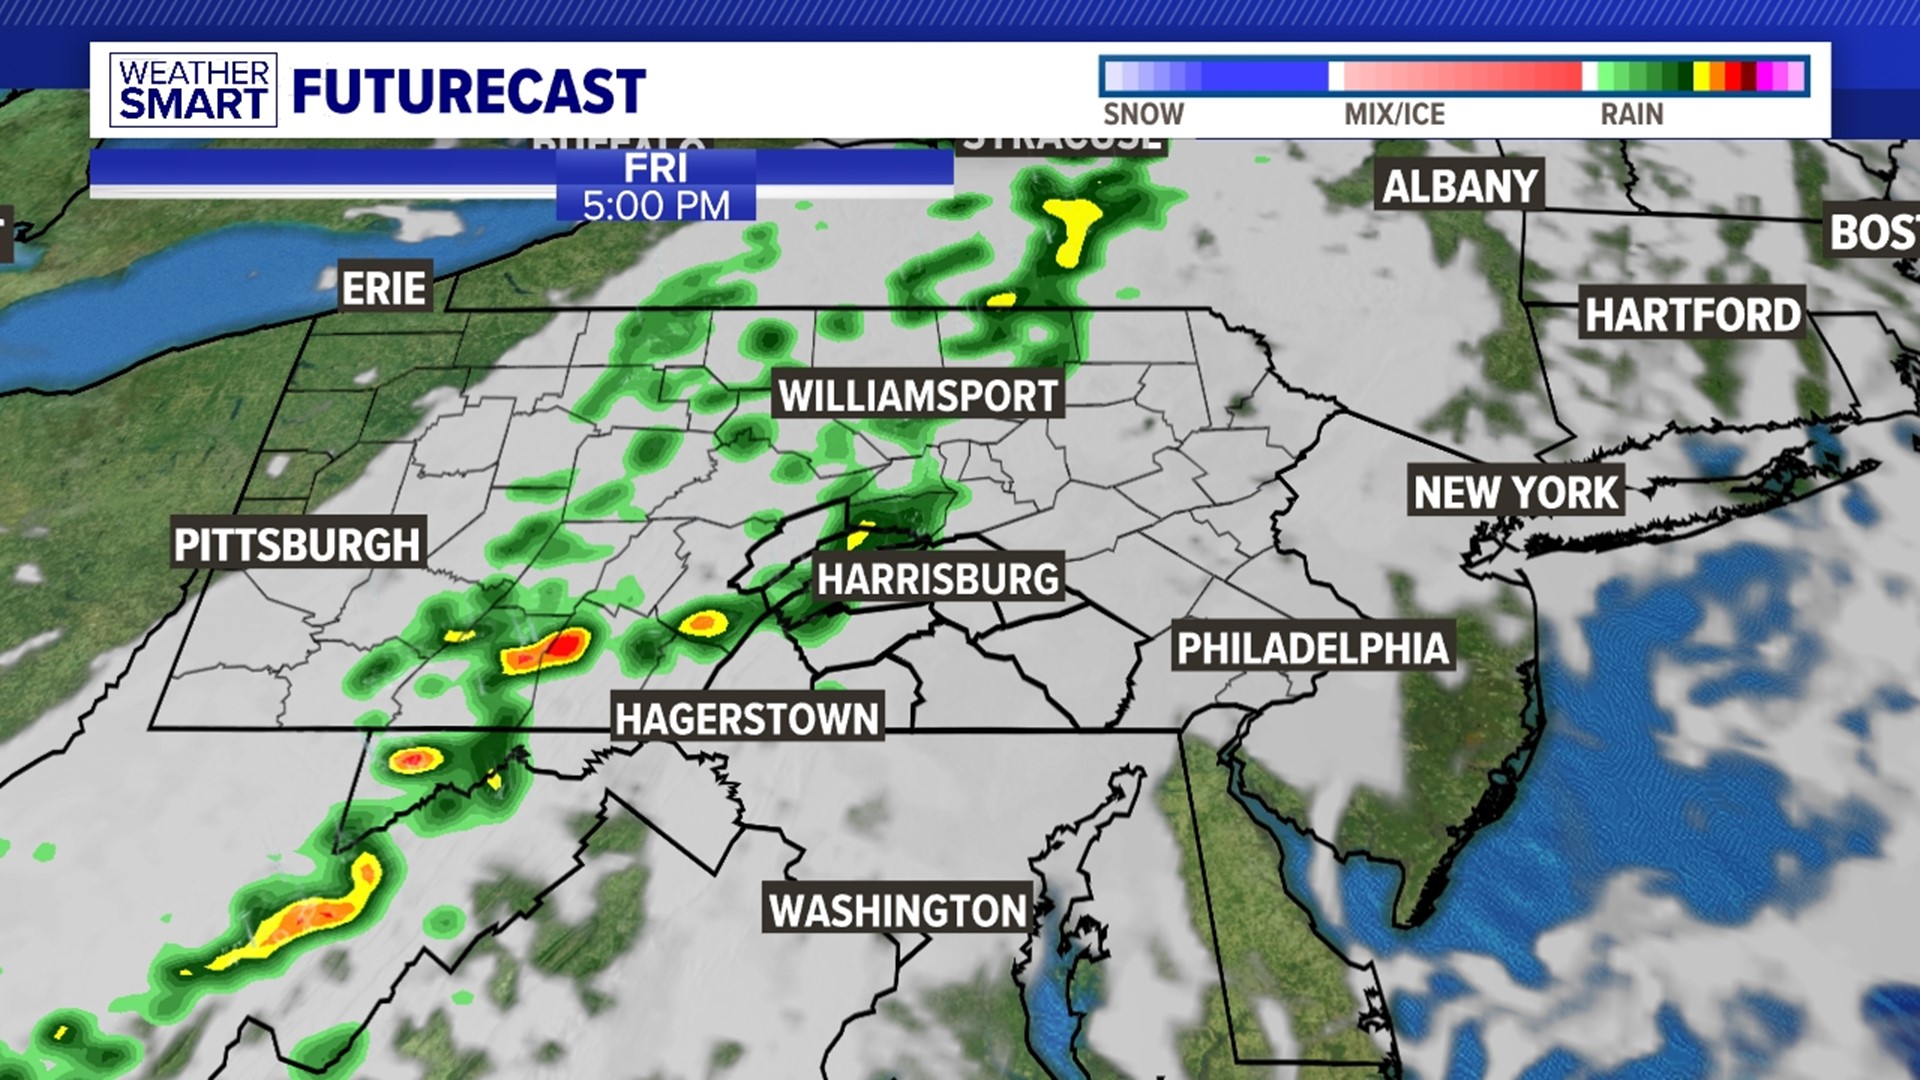 Scattered light showers return around the lunch time hour to finish out the work week. 30MPH wind gusts impact Saturday afternoon before a brief warm-up.